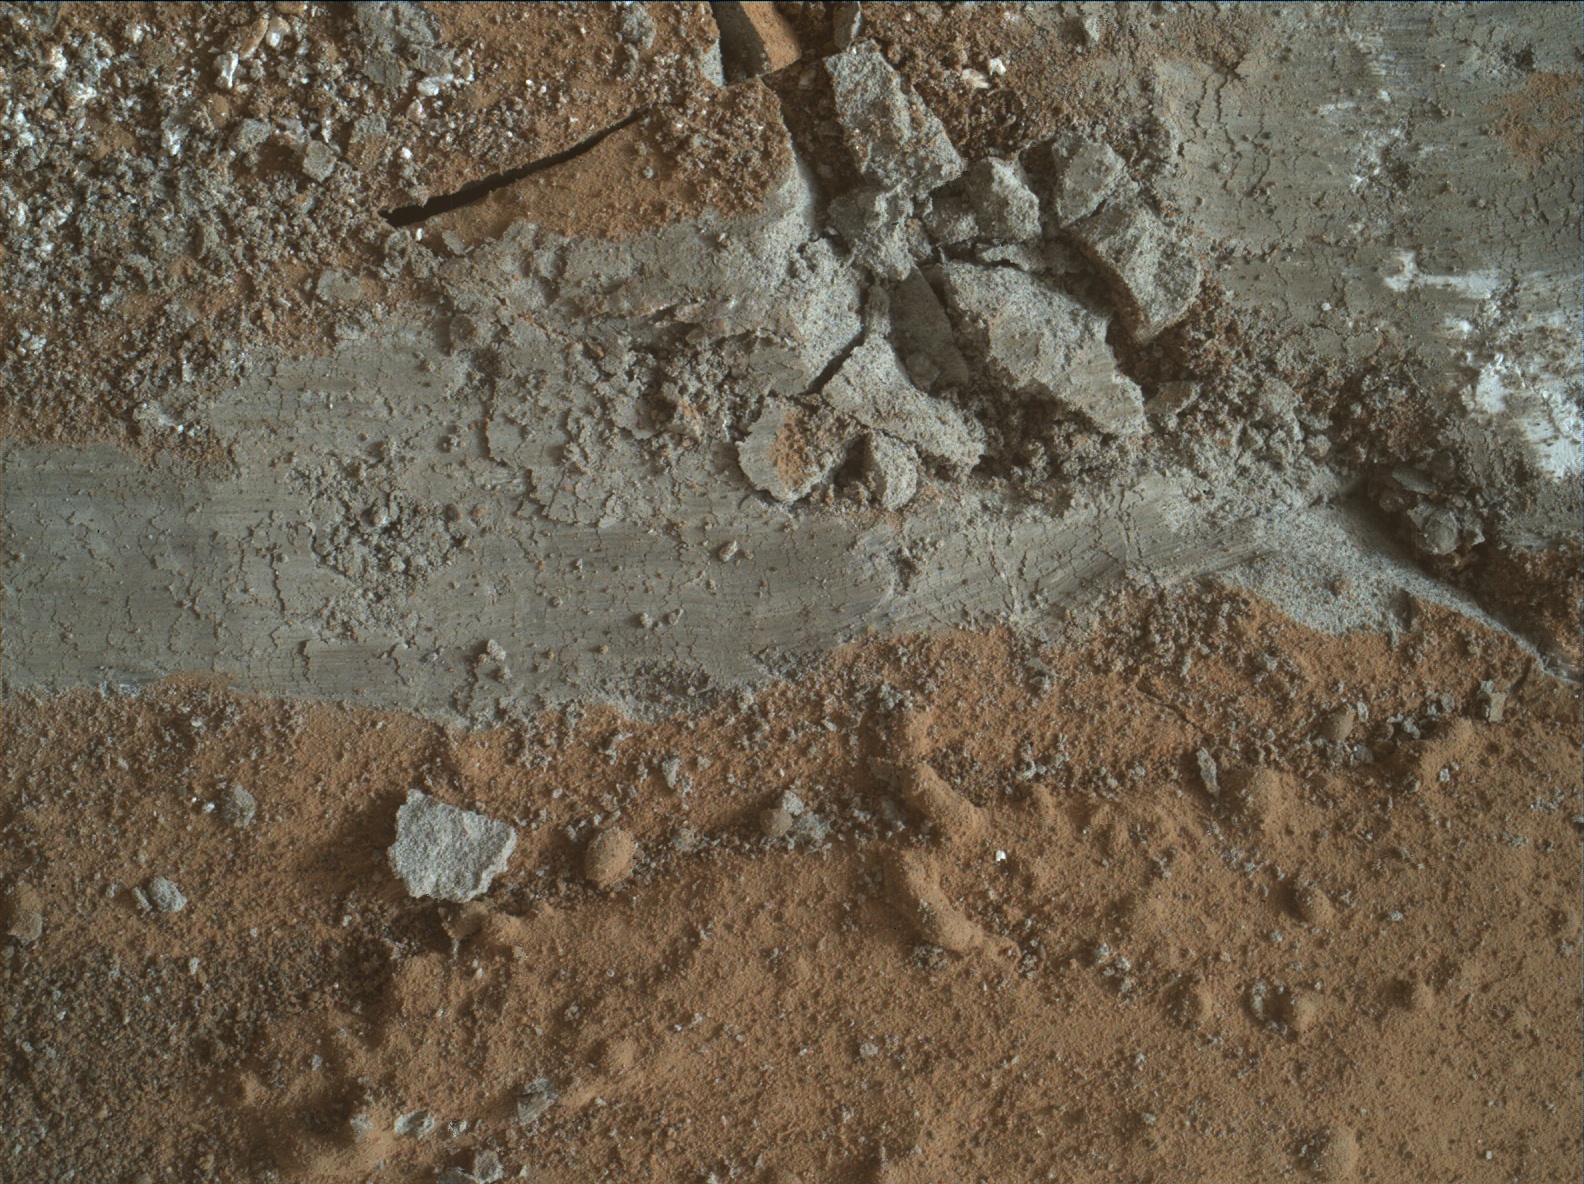 Nasa's Mars rover Curiosity acquired this image using its Mars Hand Lens Imager (MAHLI) on Sol 2667